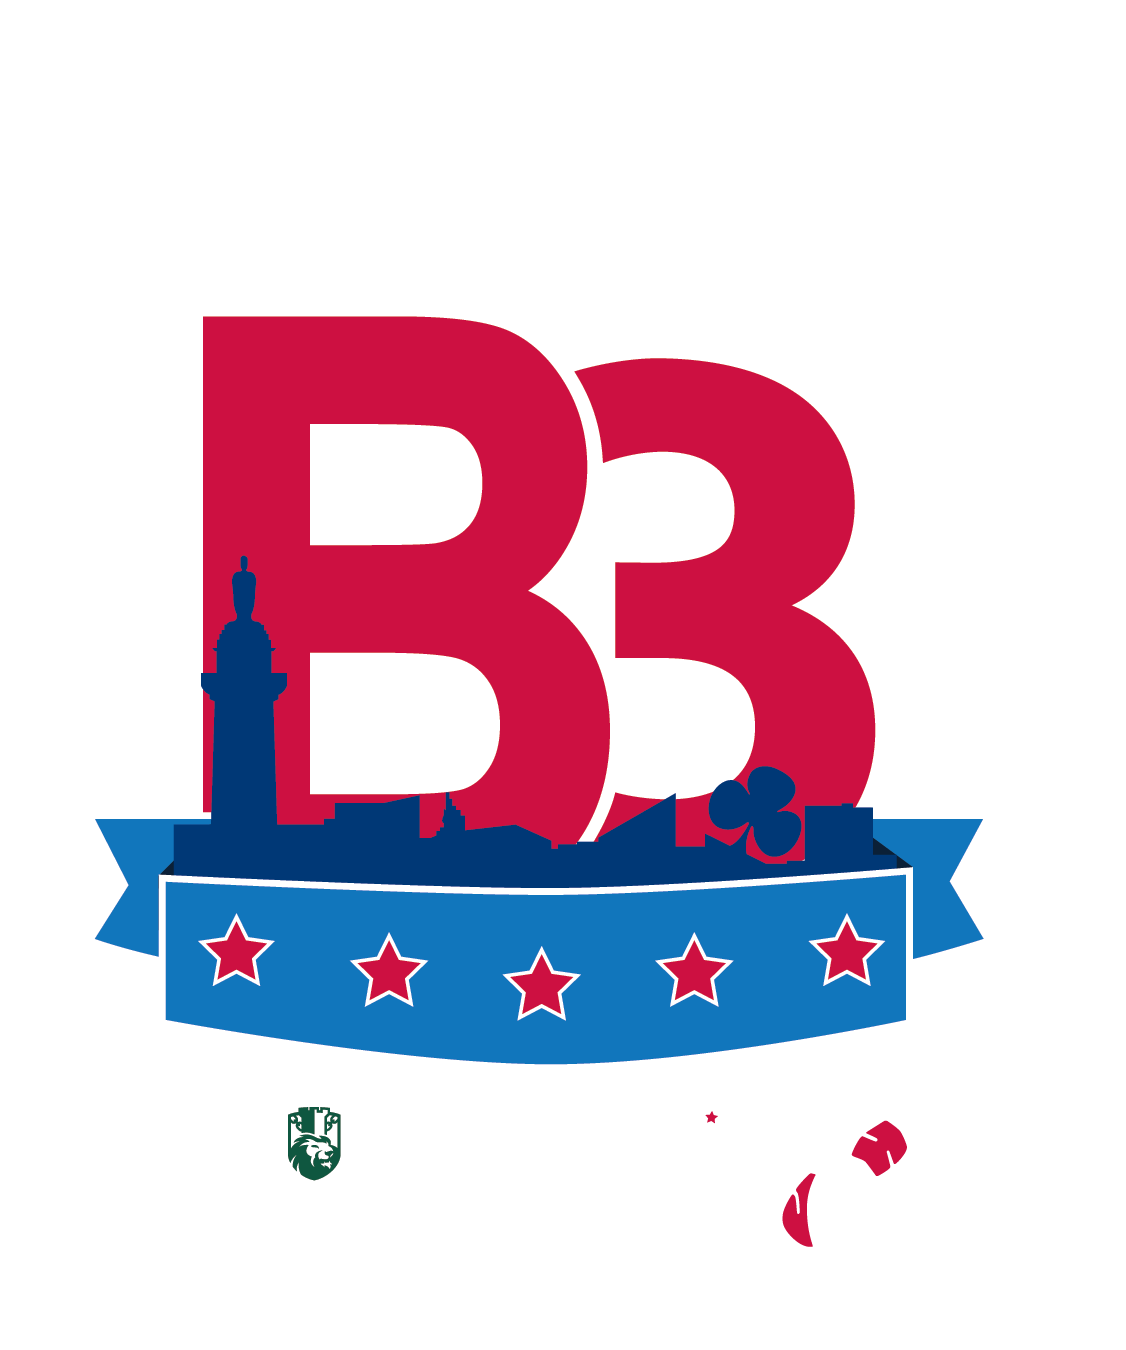 Under Armour B3 Distance Series presented by Kelly Benefits